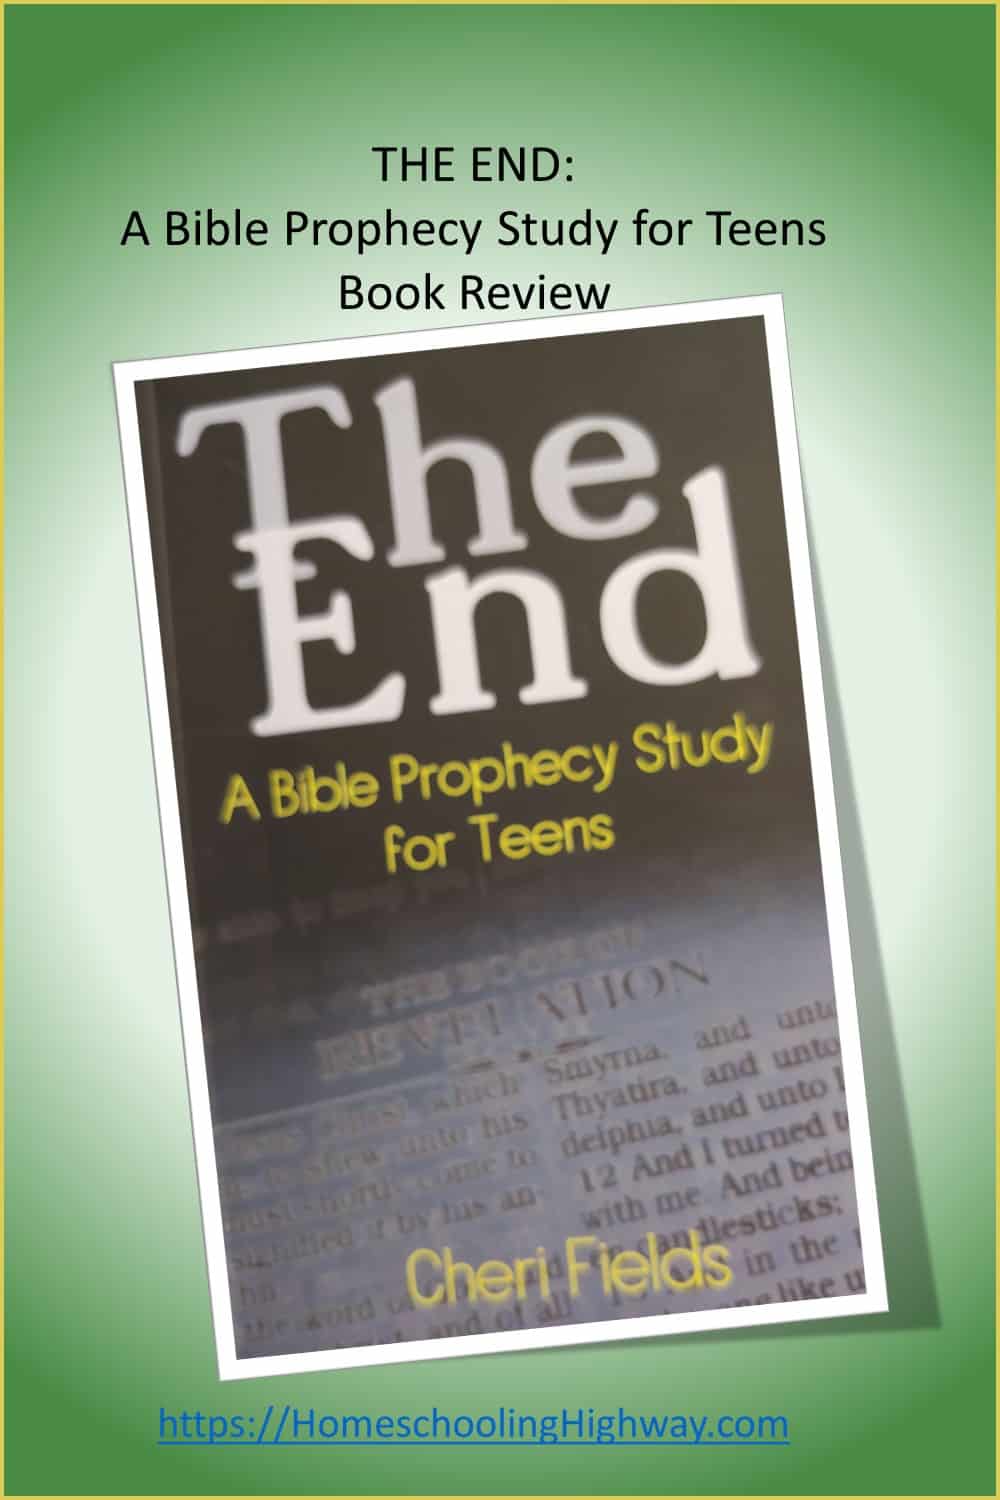 The End. A Bible Prophecy Study for Teens by Cheri Fields. Reviewed by Homeschooling Highway